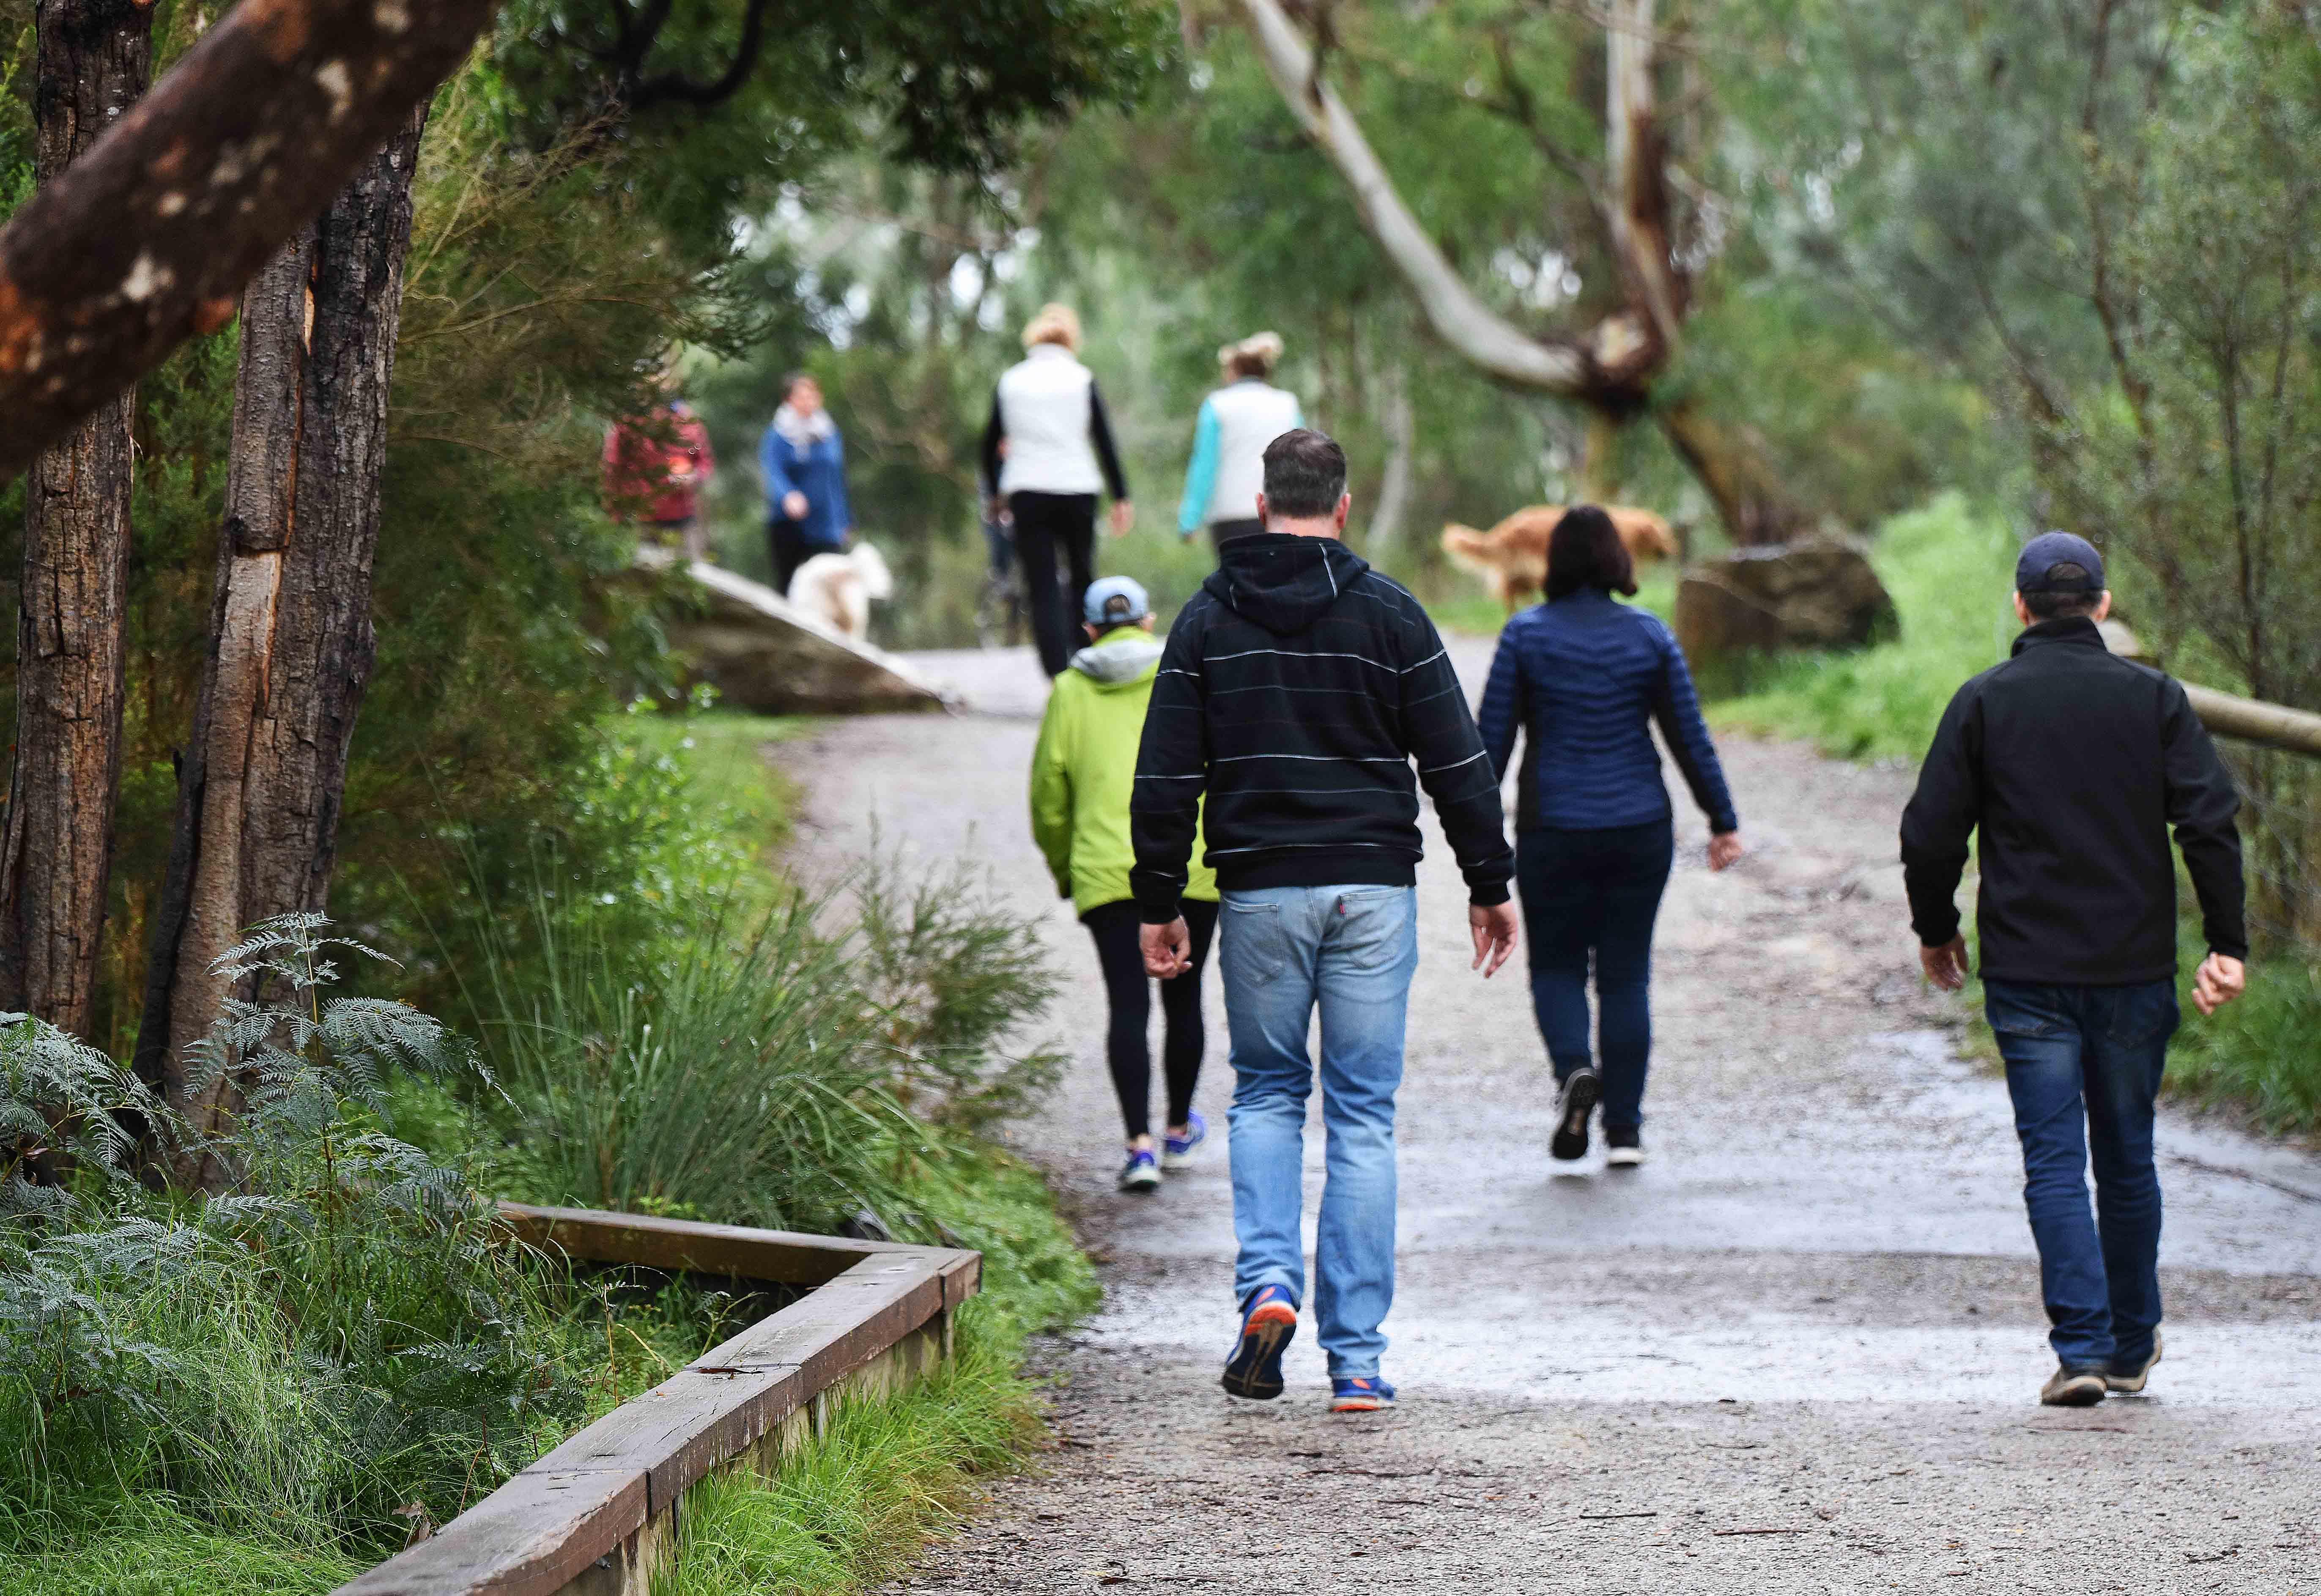 Photograph of people walking along a track in Warrandyte amongst trees and other vegetation